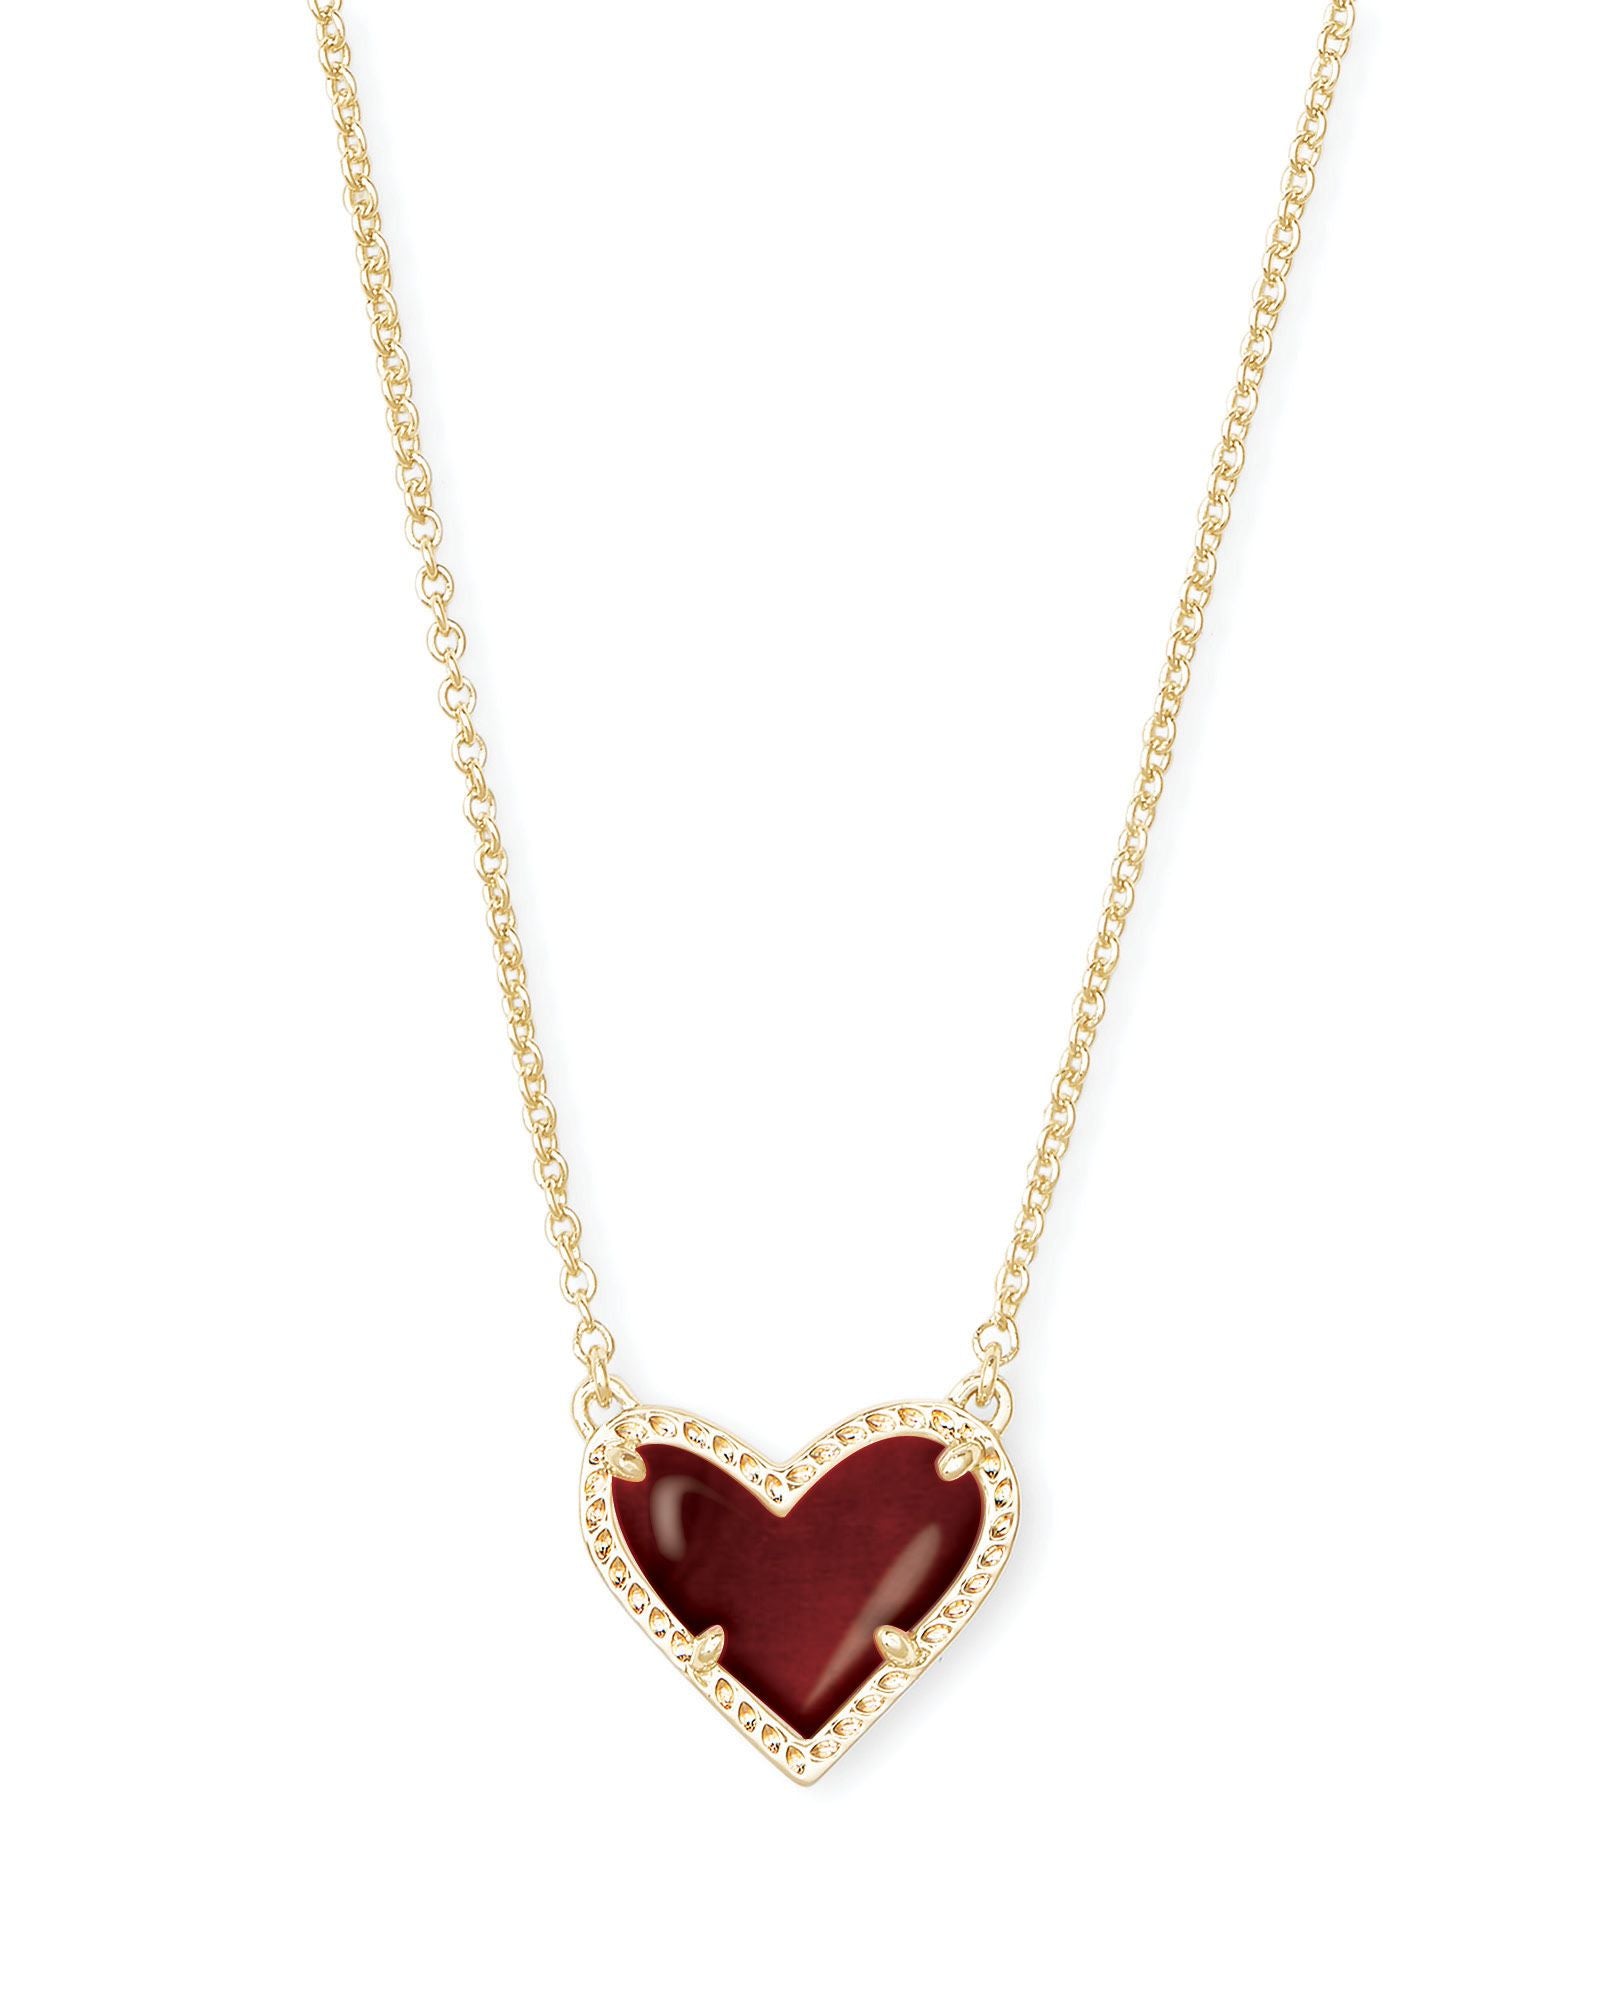 Ari Heart Pendant Necklace Gold and Maroon